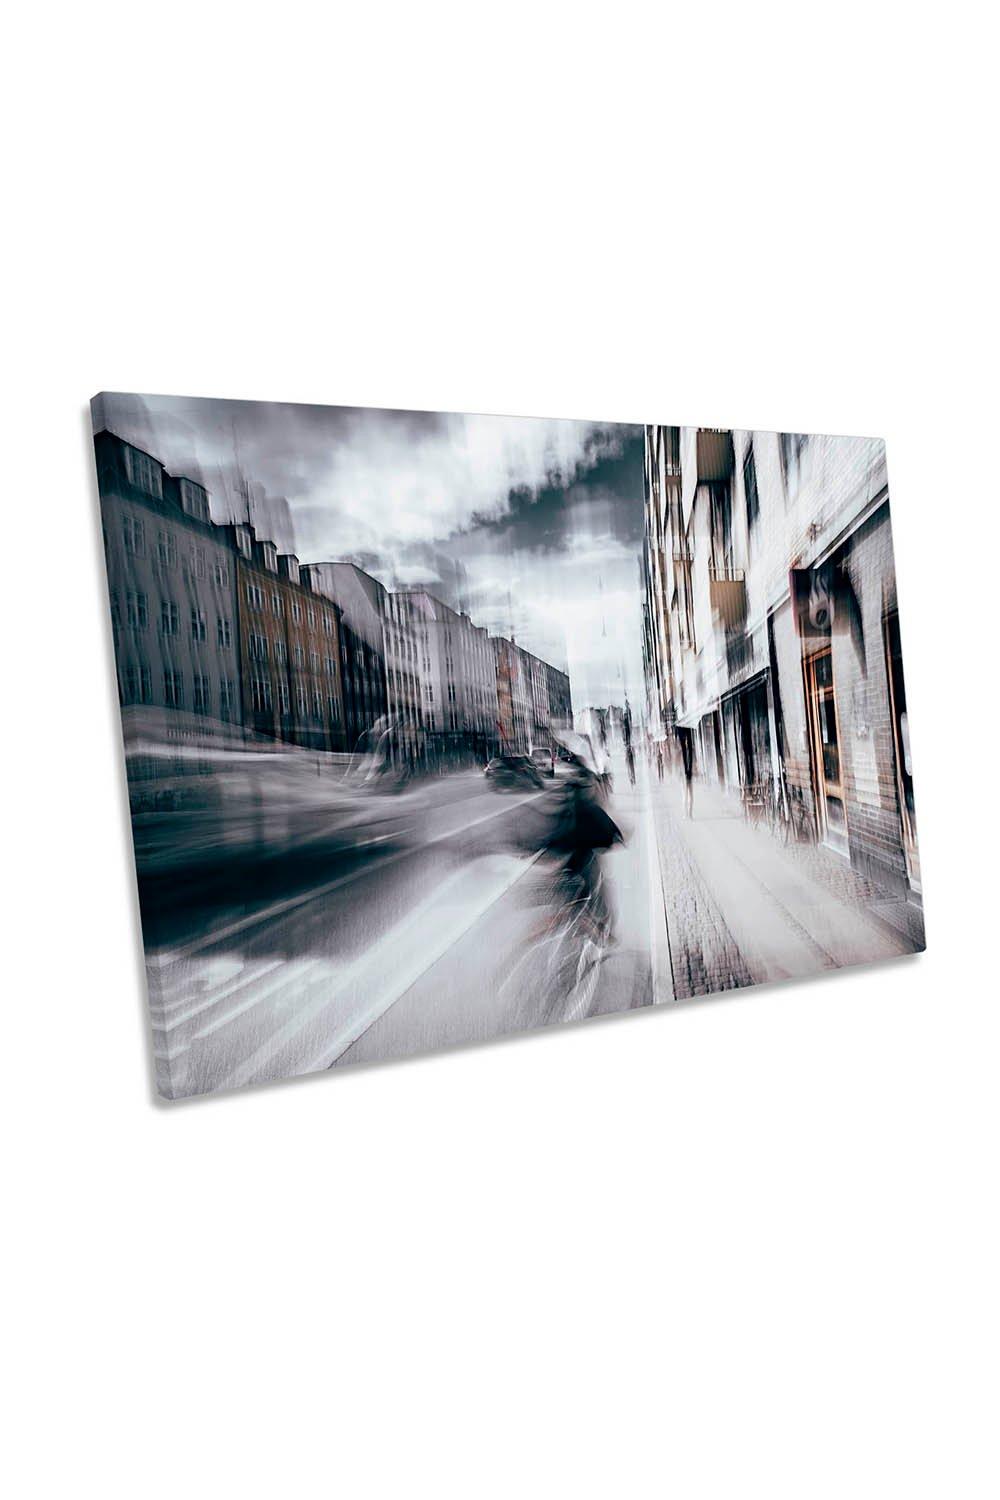 Life in Copenhagen City Street Abstract Canvas Wall Art Picture Print